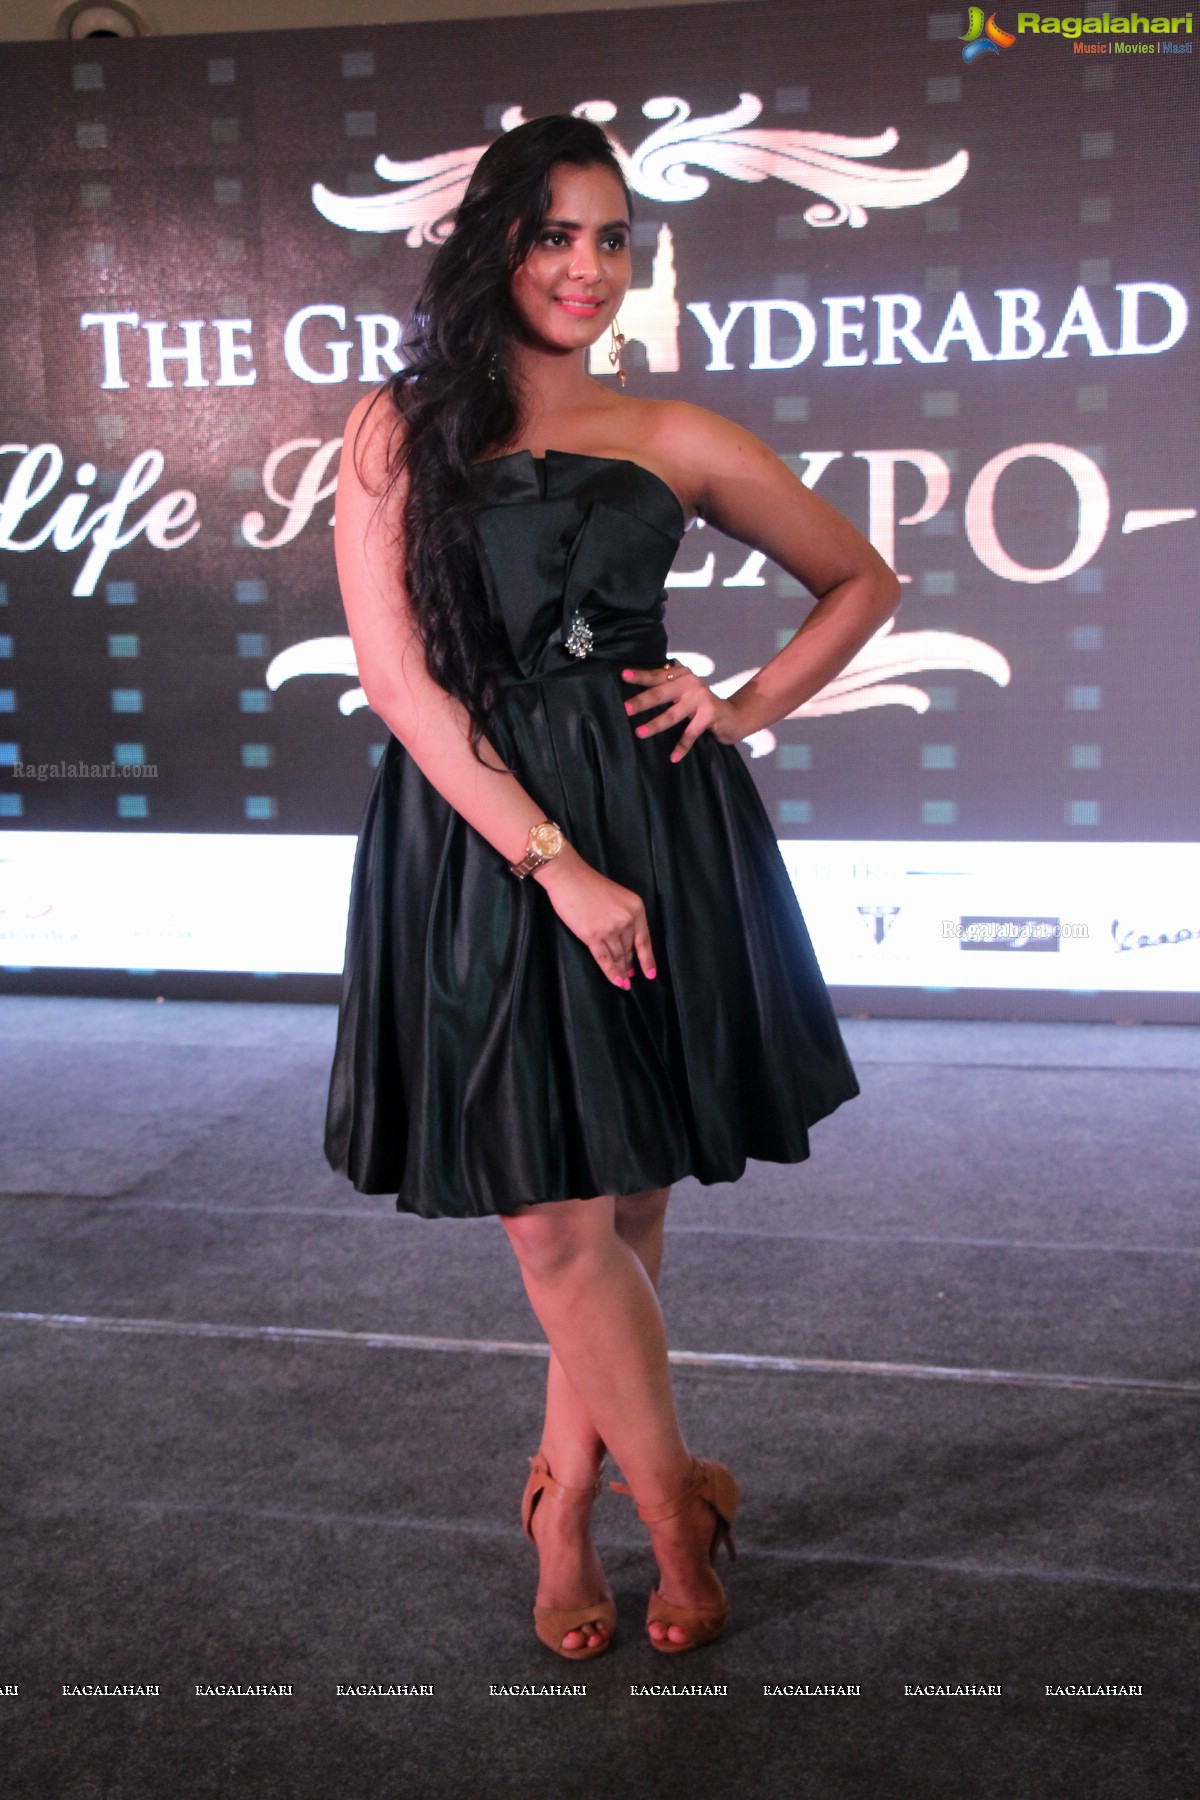 SIPL Lifestyle Expo 2016 Fashion Show at Forum Sujana Mall, Hyderabad (Day 3)